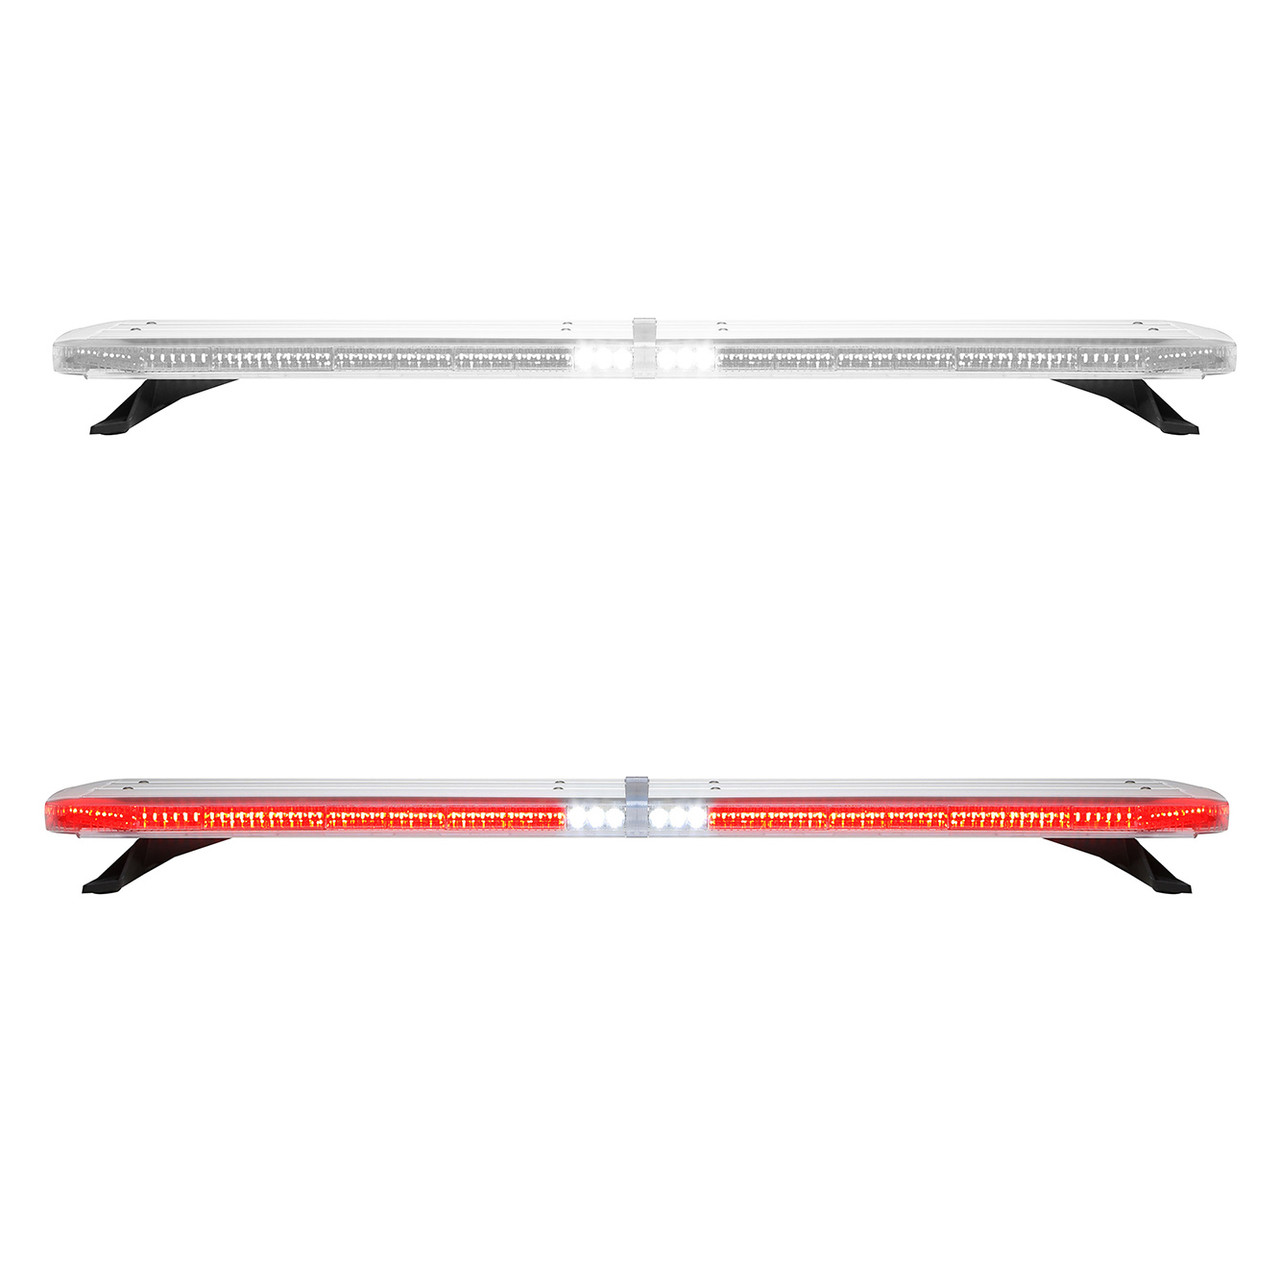 Whelen Legacy LED Light Bar, Dual Color, DUO, WeCan, 44, 48, or 54 inches